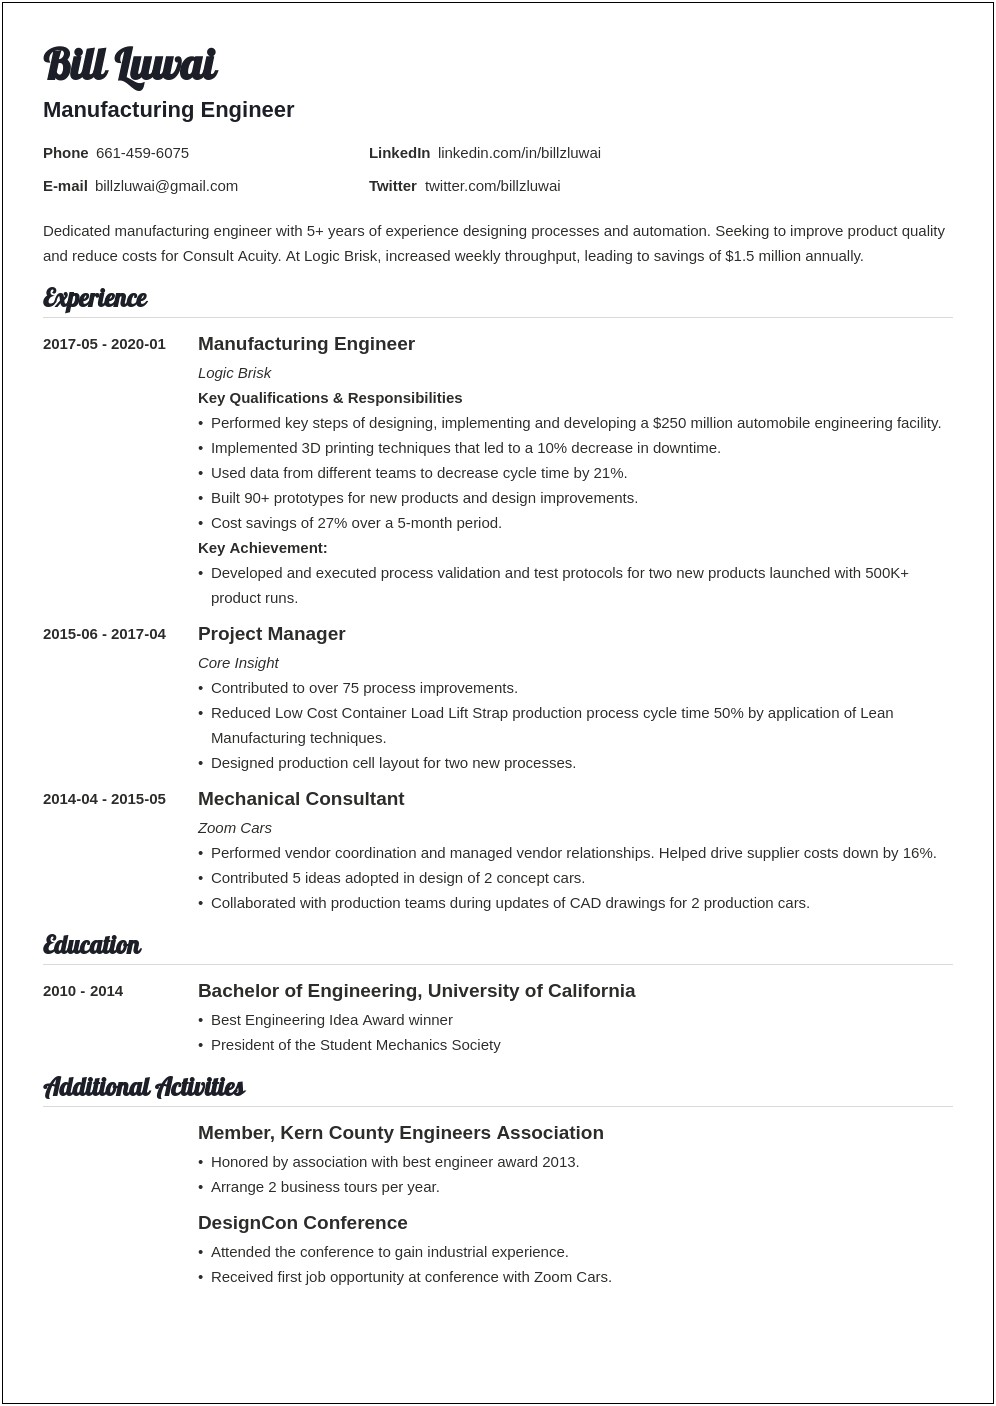 Resume Objective For Entry Level Manufacturing